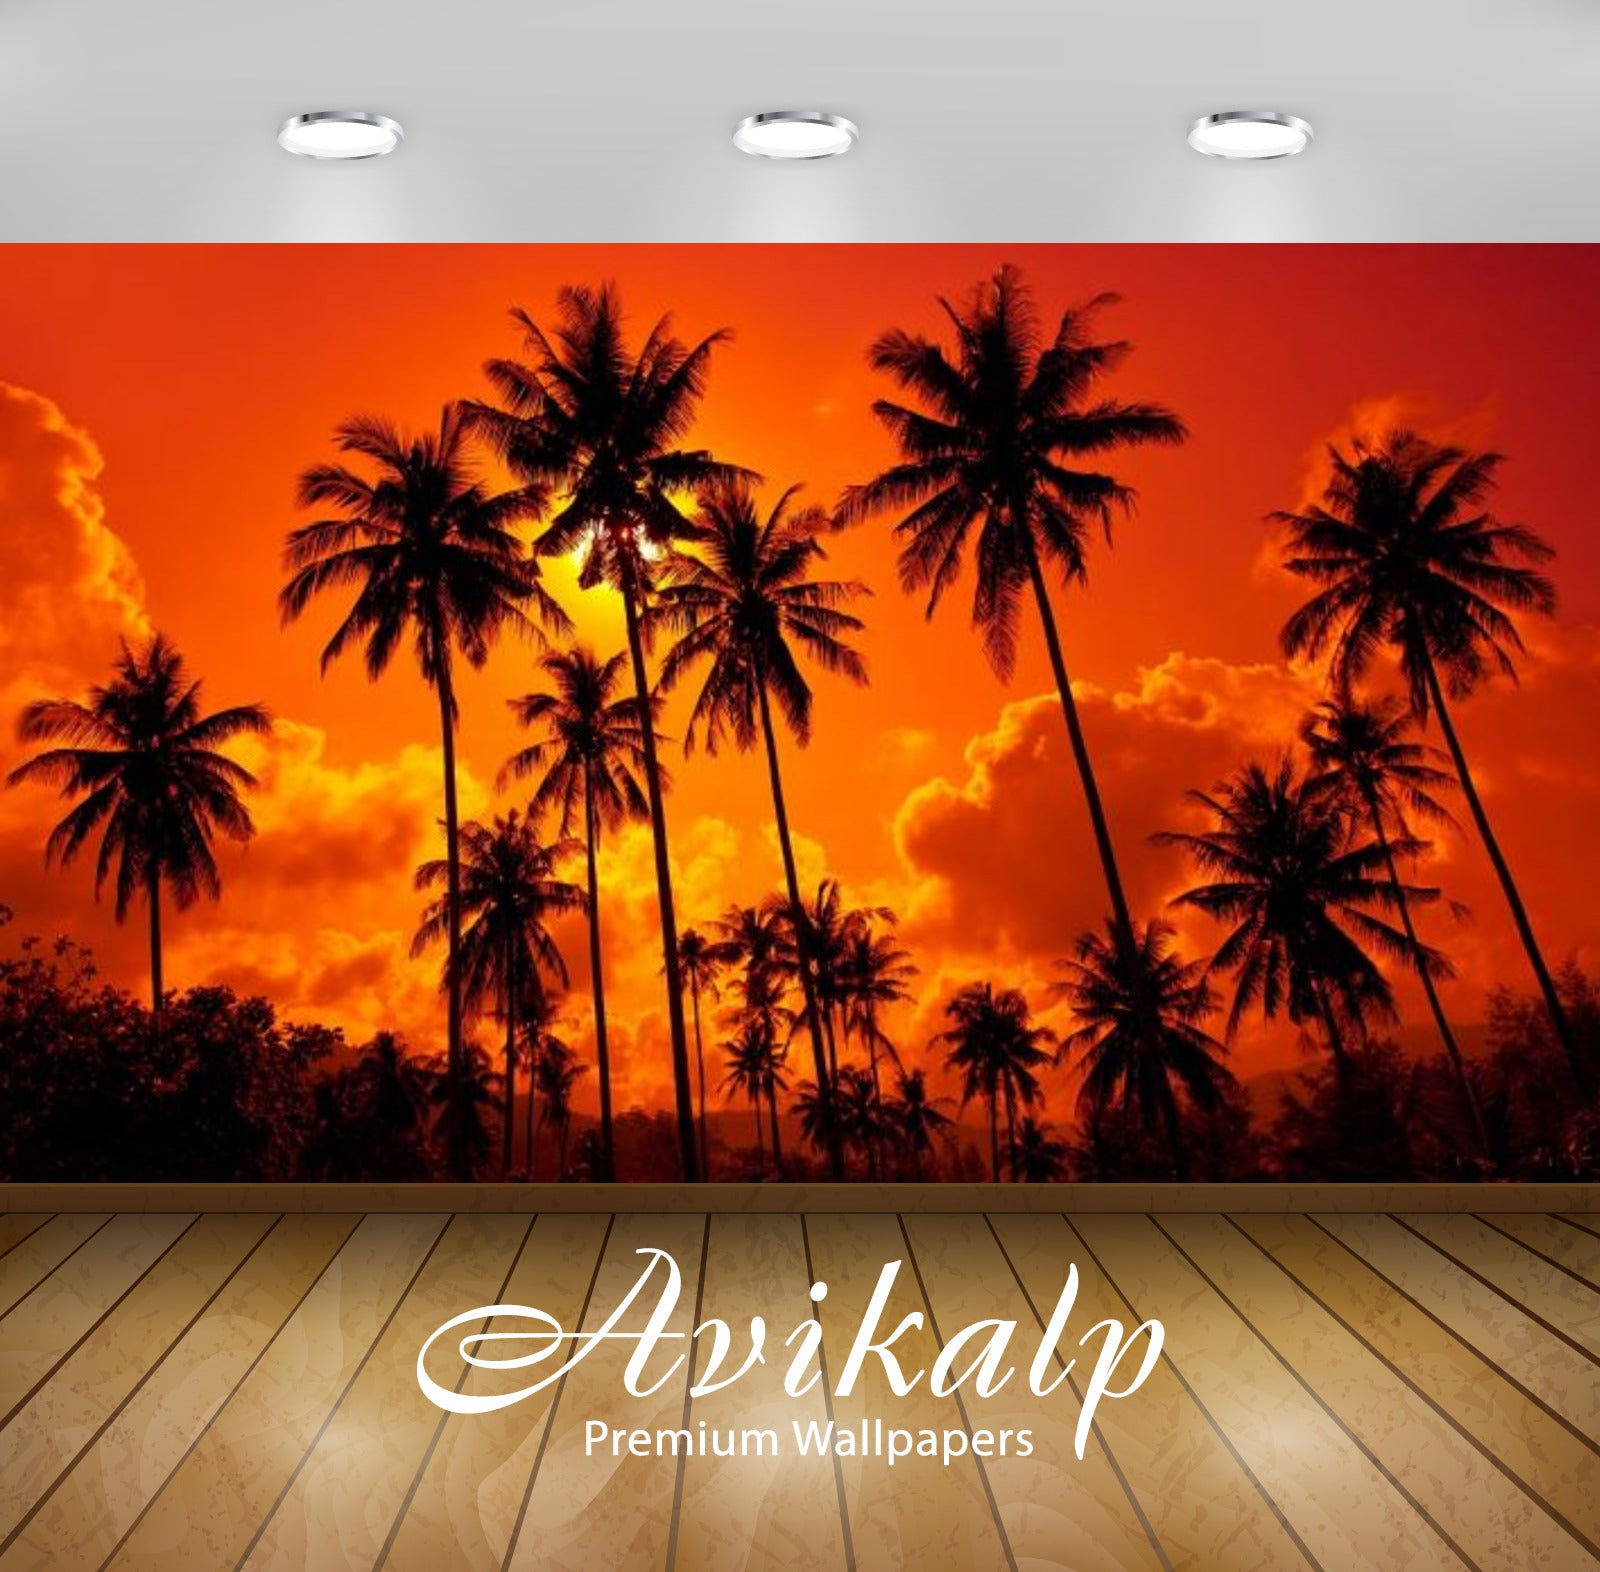 Avikalp Exclusive Awi2538 Crveno Sunset Sky With Palm Full HD Wallpapers for Living room, Hall, Kids